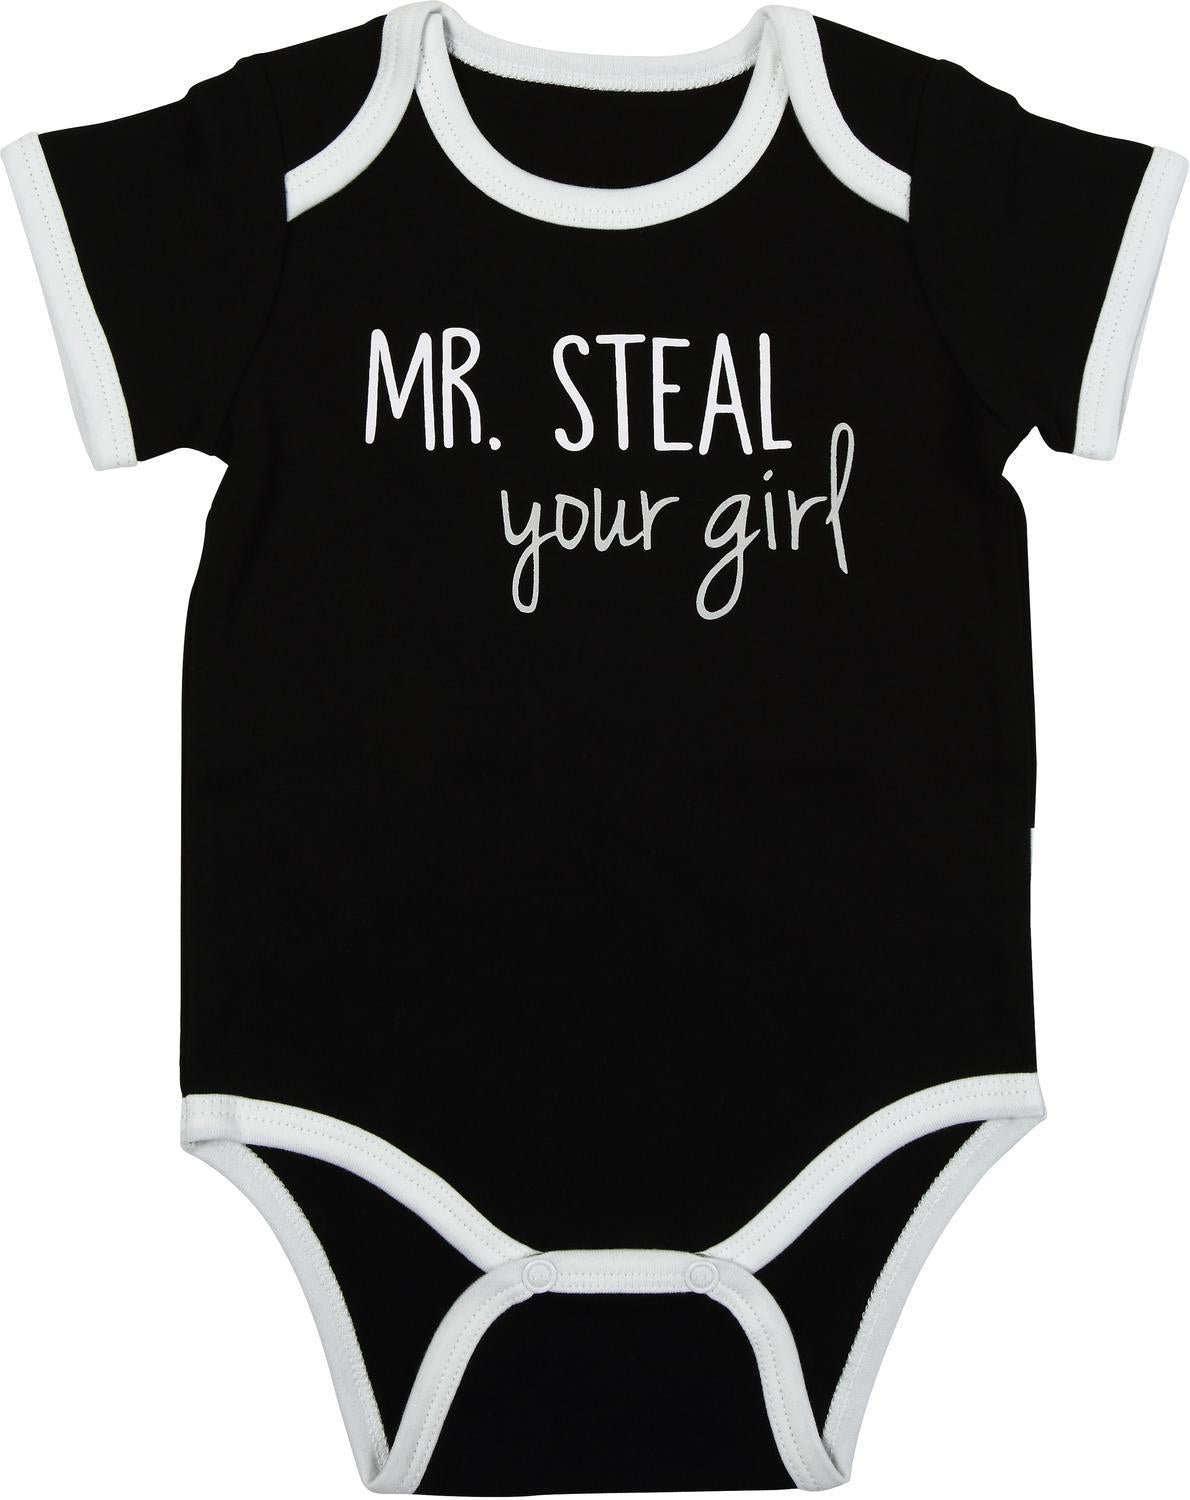 Mr. Steal Your Girl Onesie